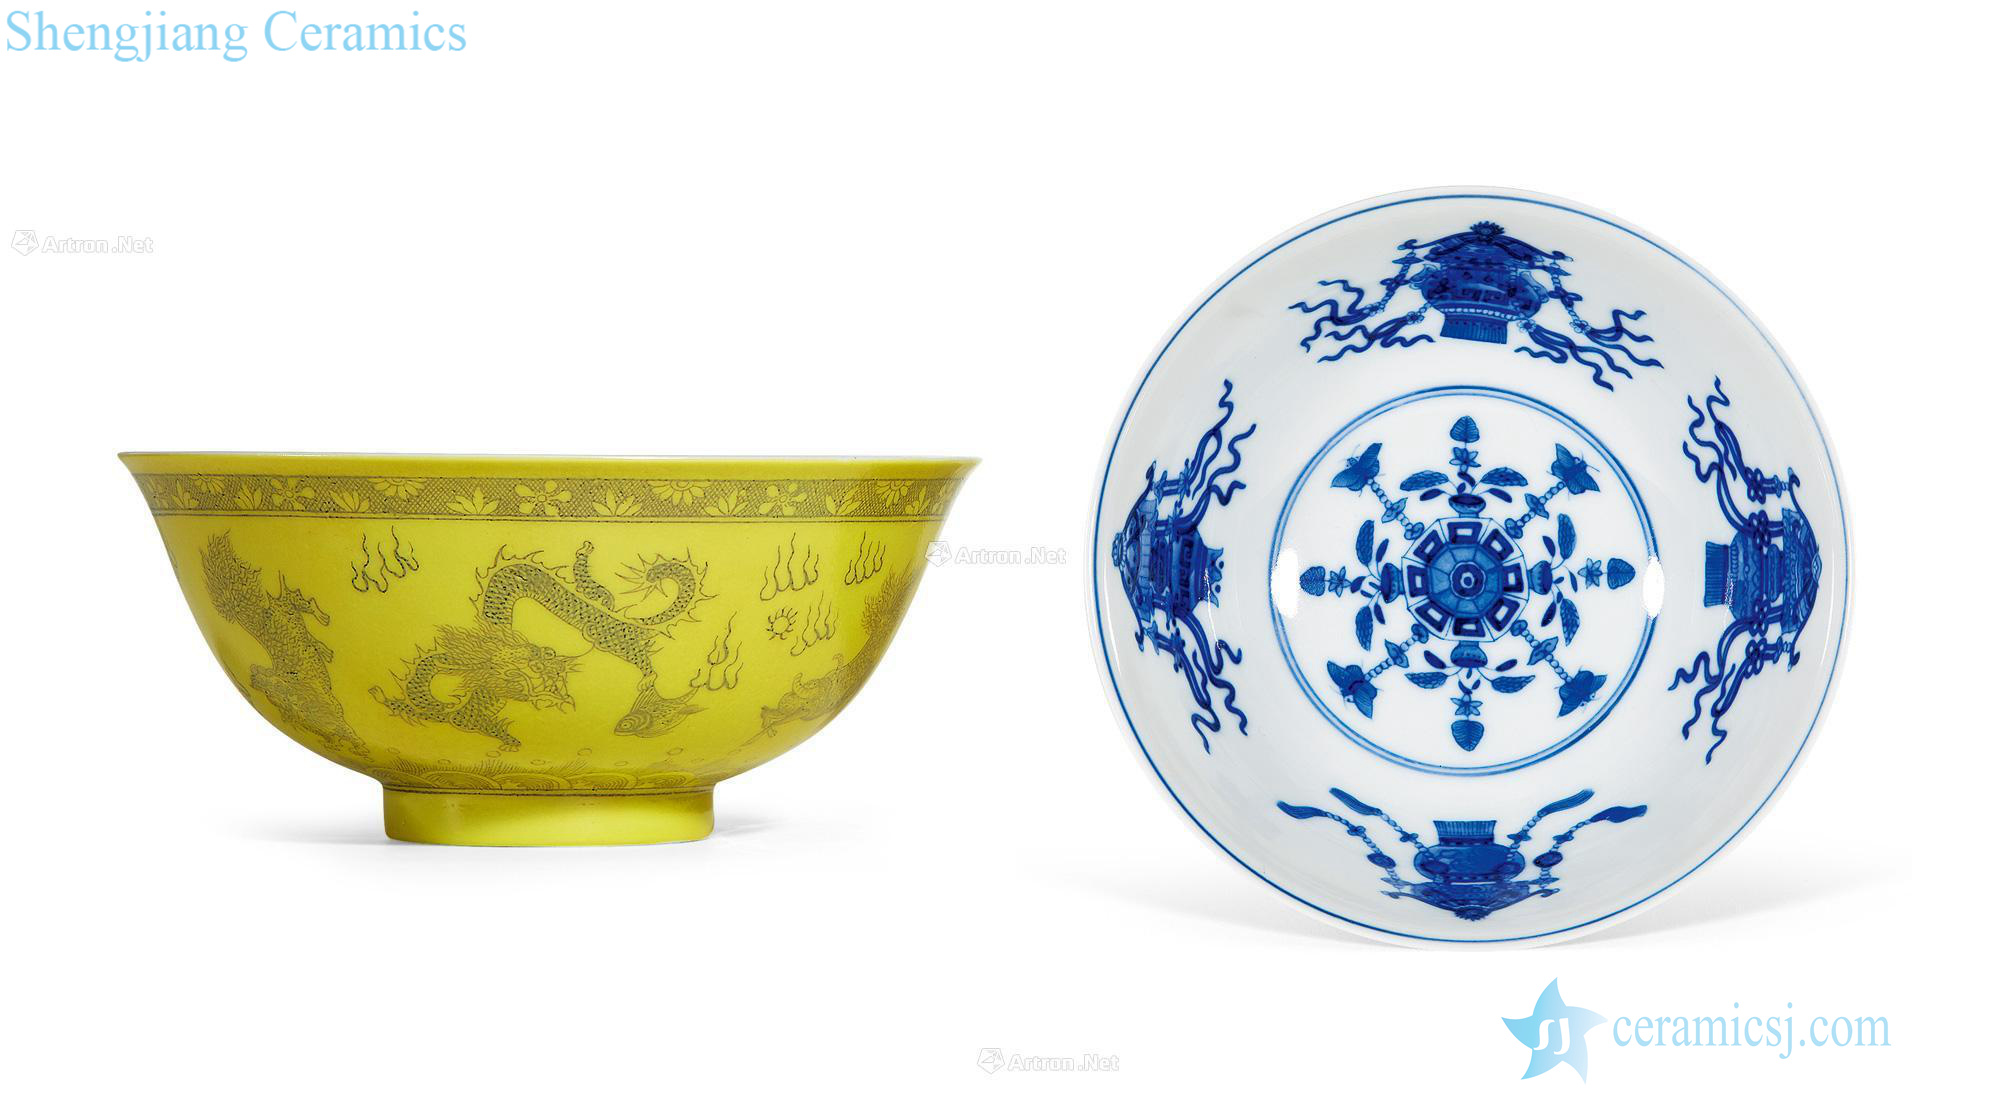 The reign of qing emperor guangxu lemon yellow to benevolent blue and white in the grain and make it plentiful lines bowl (a)